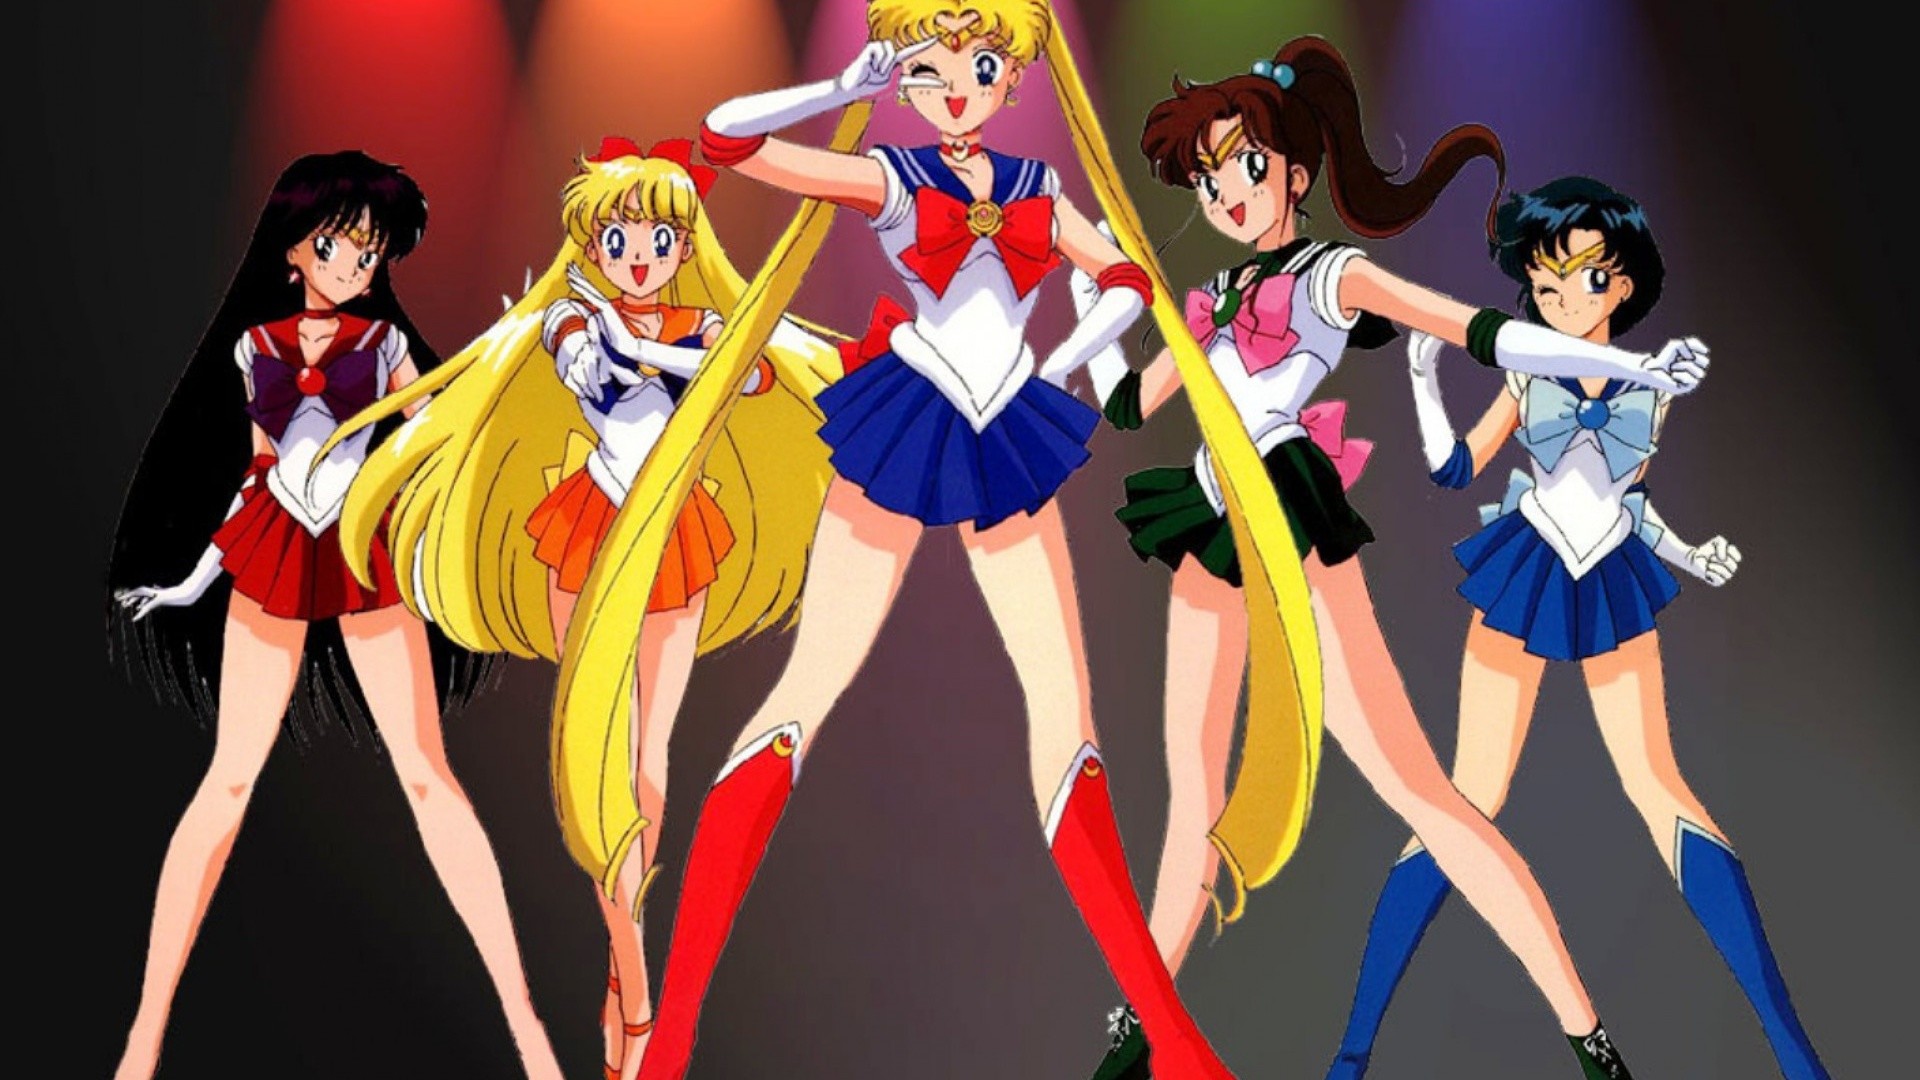 1920x1080  Sailor Moon 29. How to set wallpaper on your desktop? Click the  download link from above and set the wallpaper on the desktop from your OS.